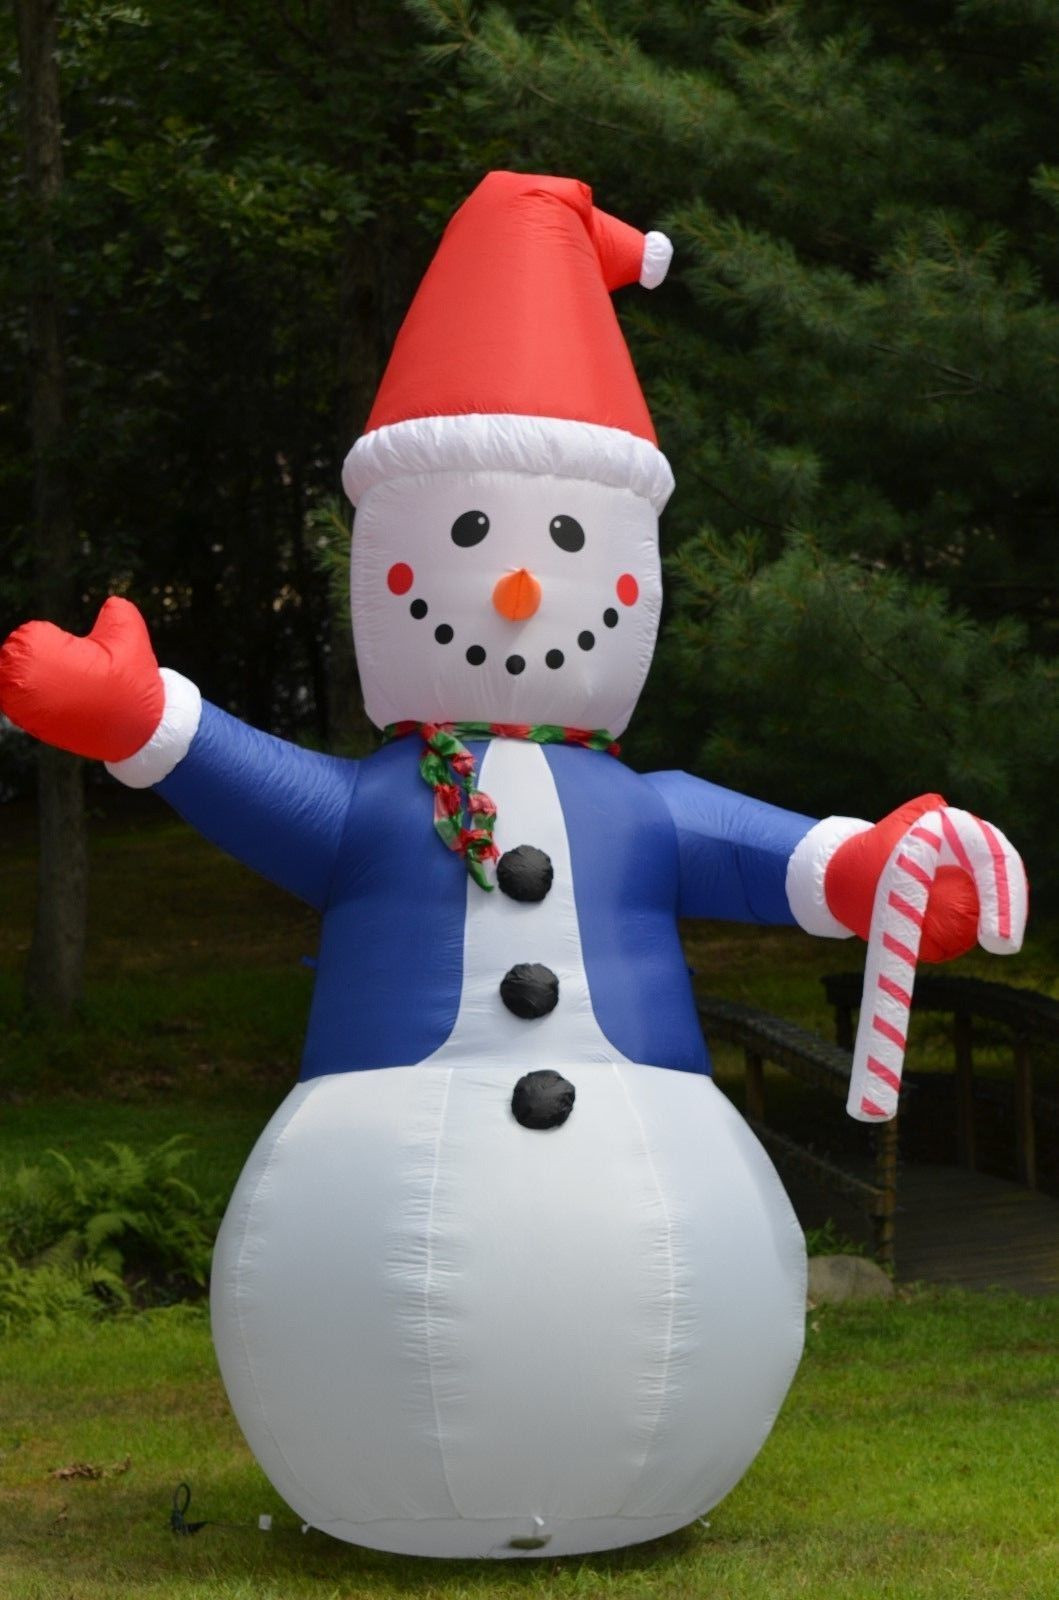 12' Lighted LIGHTSHOW Projection SNOWMAN INFLATABLE Christmas 